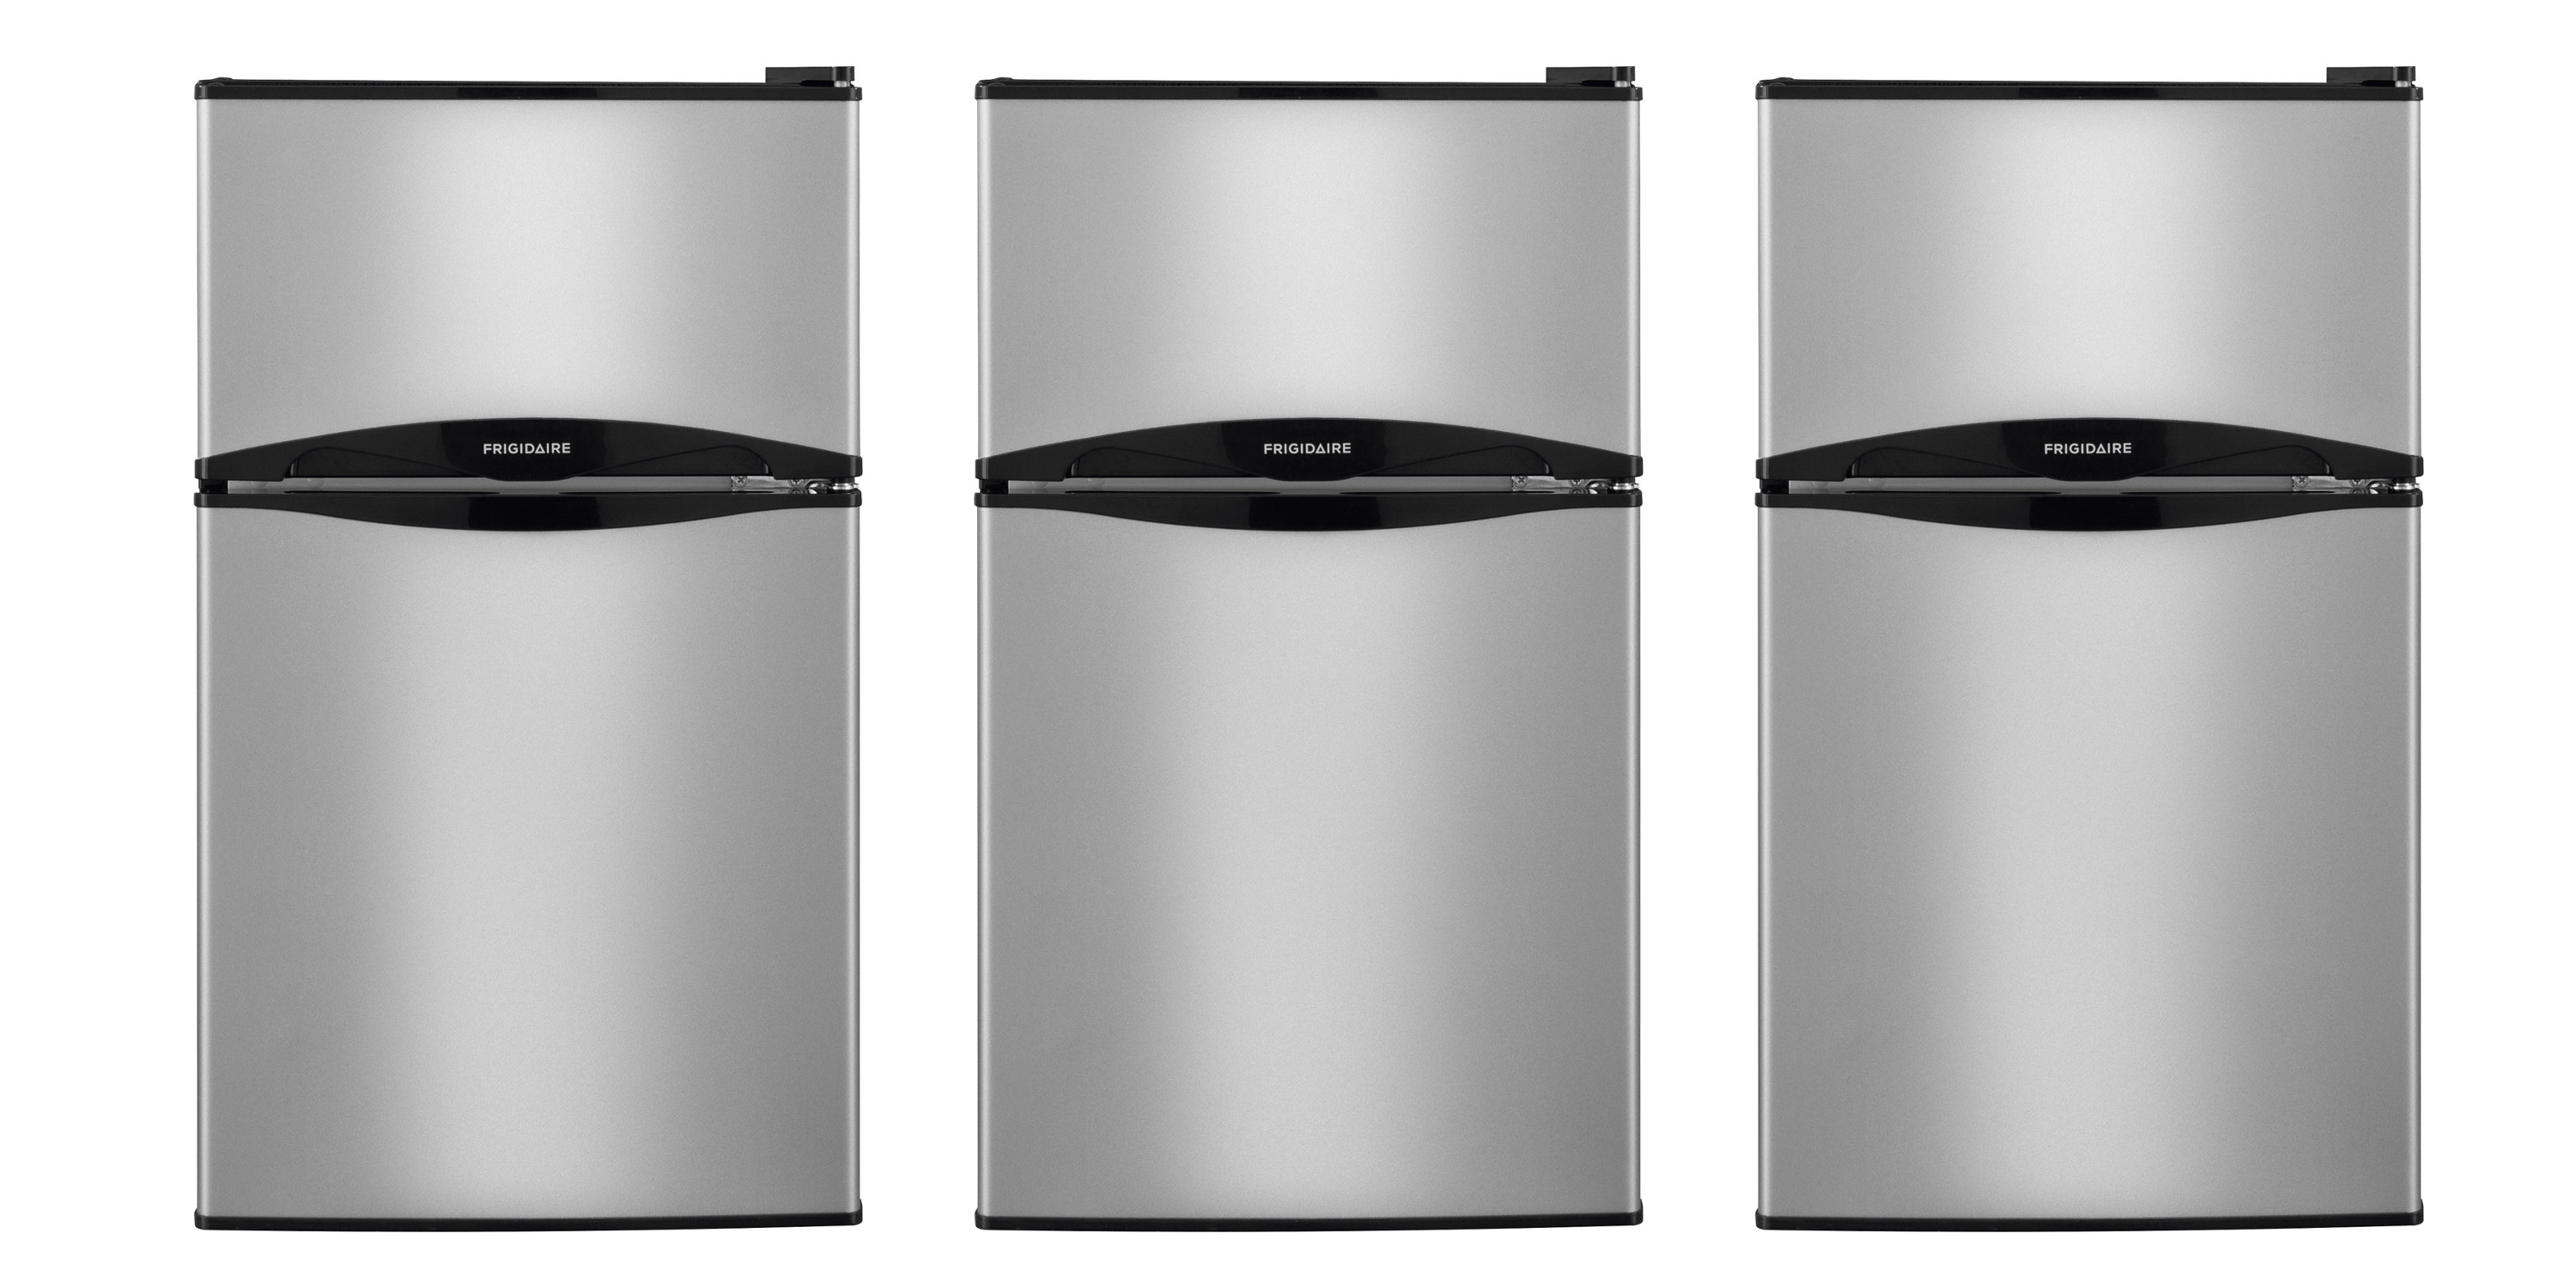 Today only, the stainless steel Frigidaire 4.5 Cu. Ft. Mini Fridge is